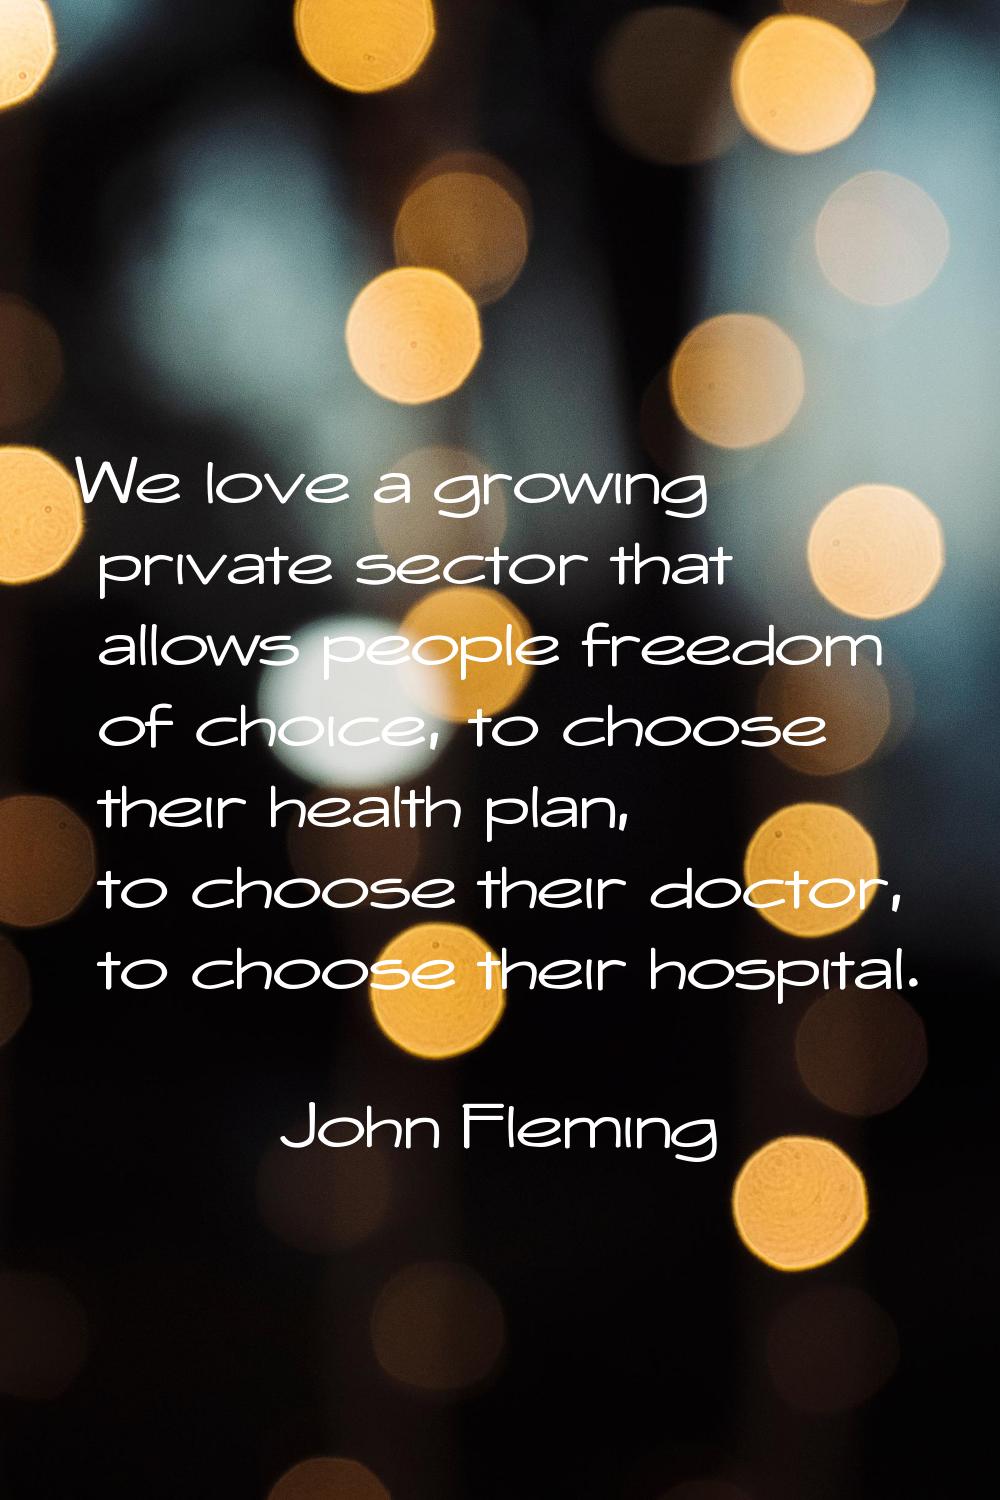 We love a growing private sector that allows people freedom of choice, to choose their health plan,